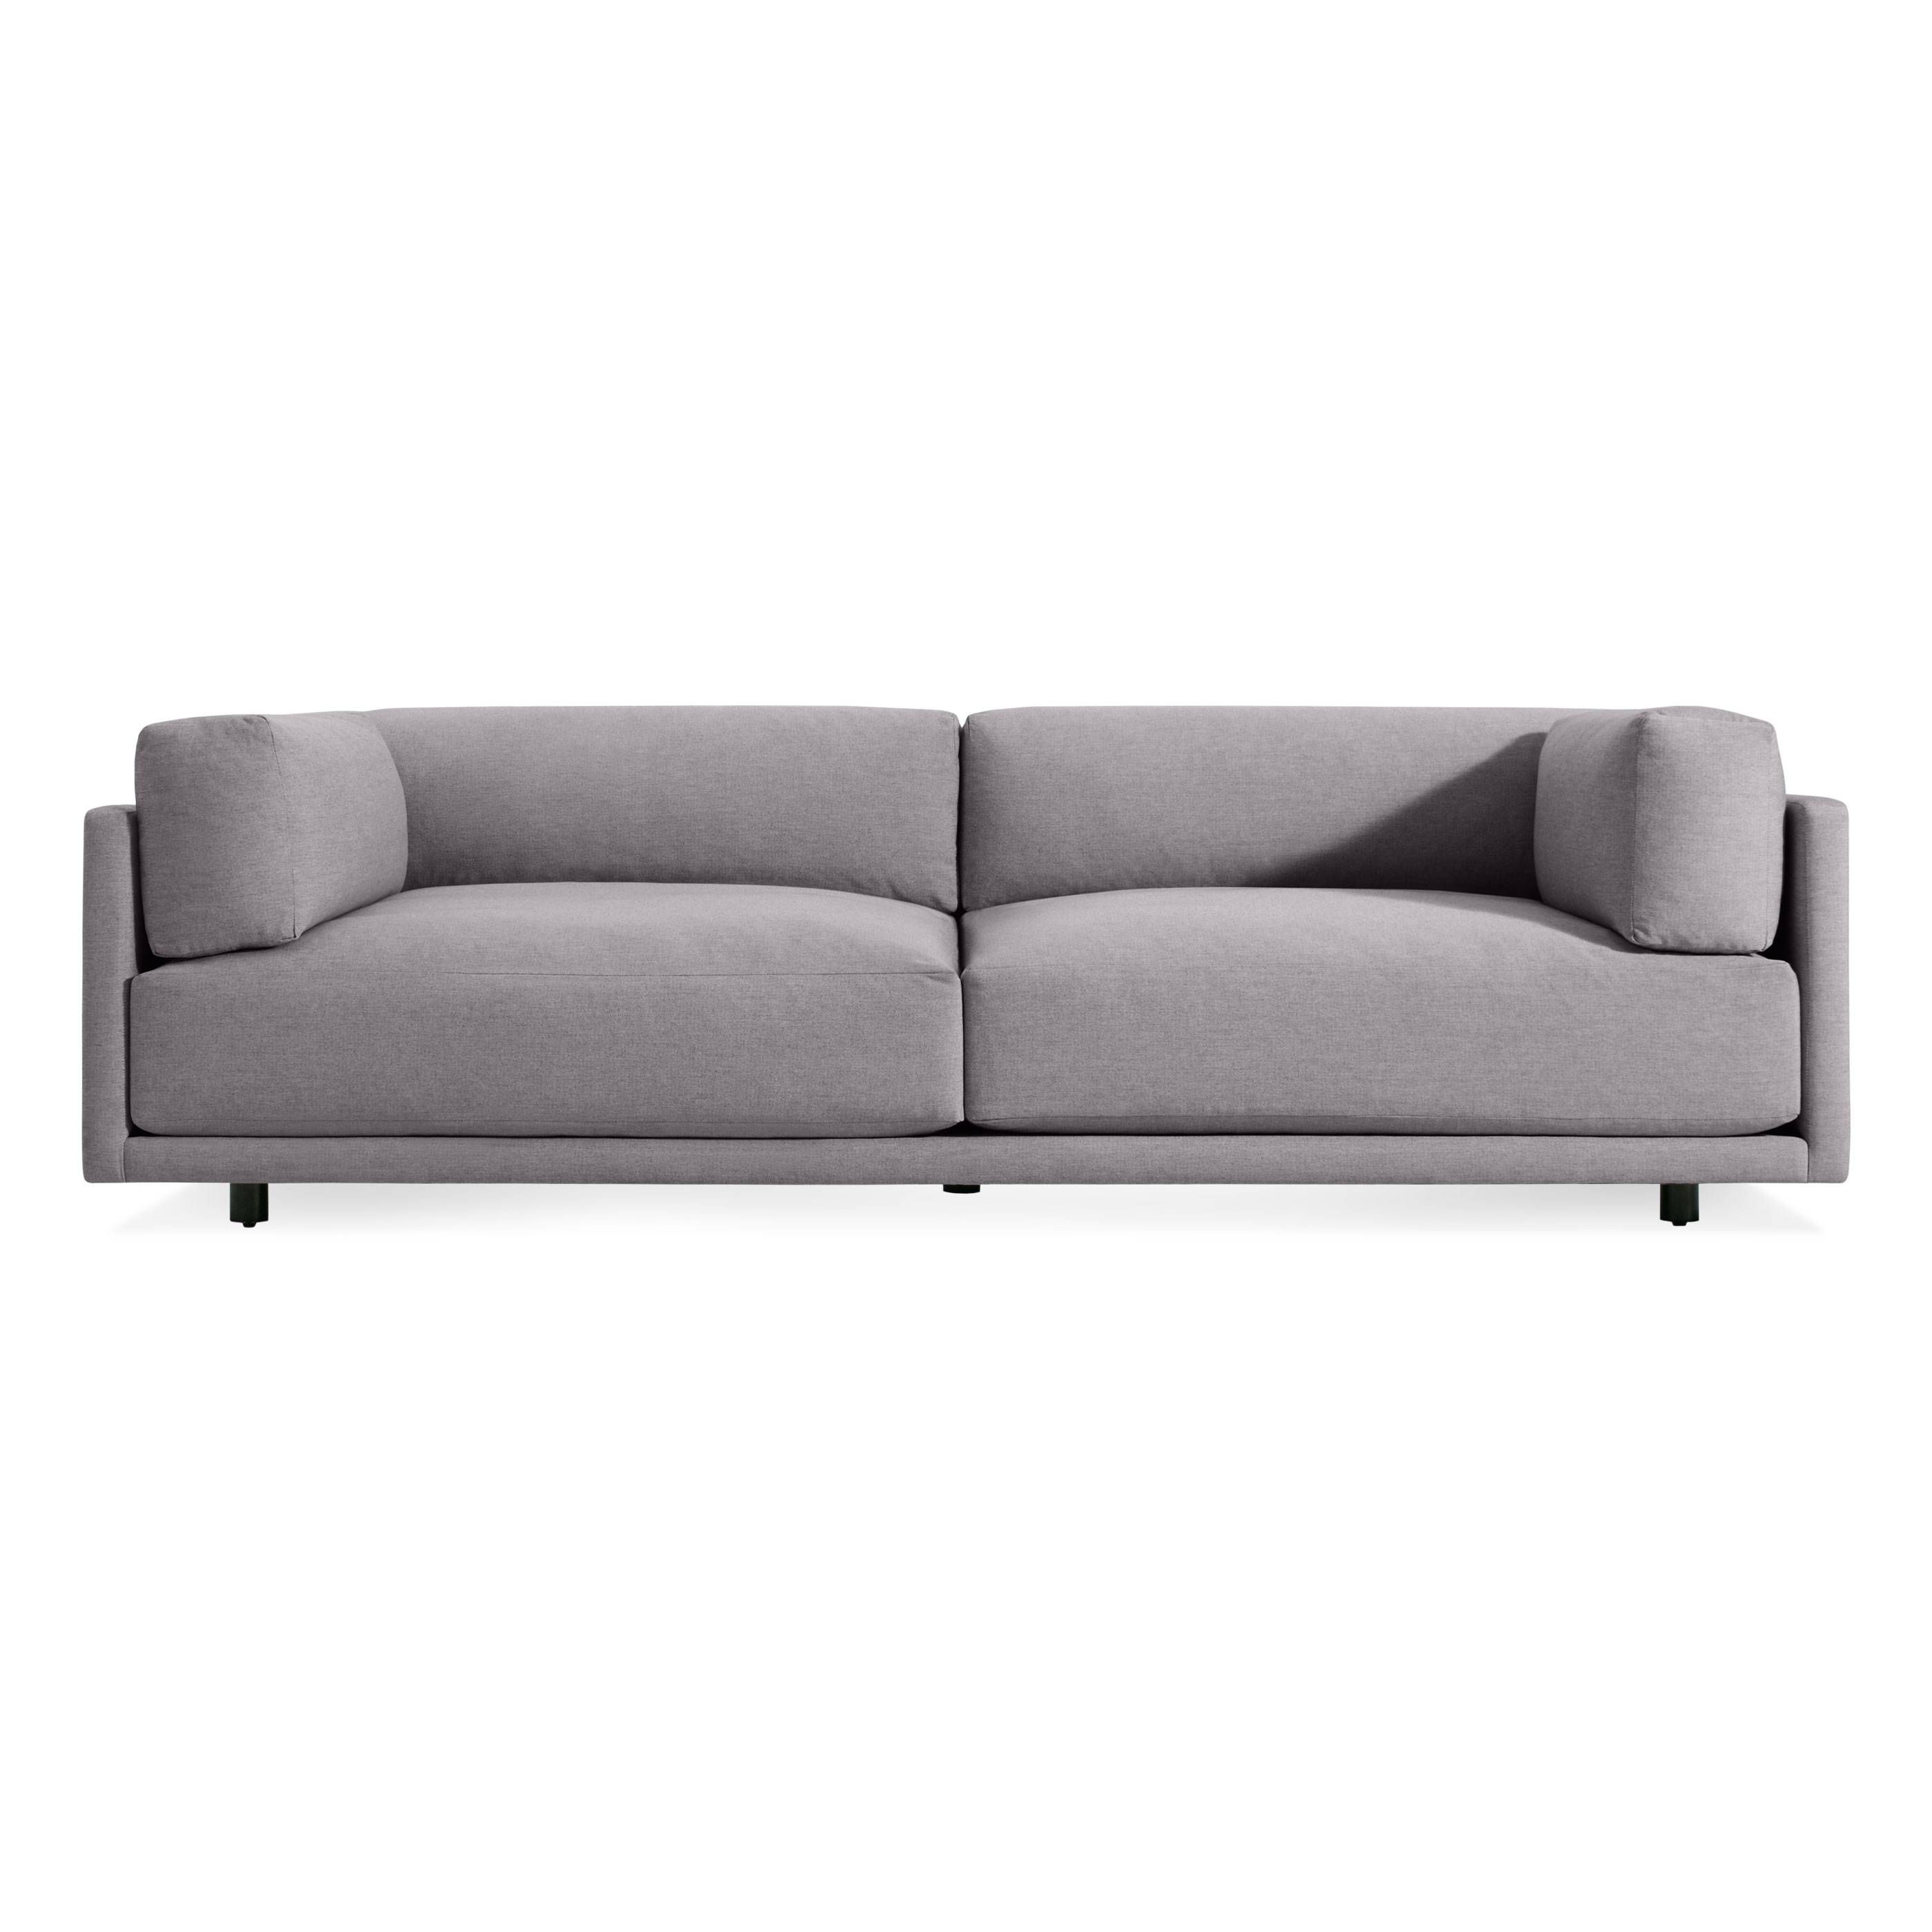 Sofas Center : Extra Deep One Cushion Sofa In Tan Astounding With One Cushion Sofas (View 2 of 30)